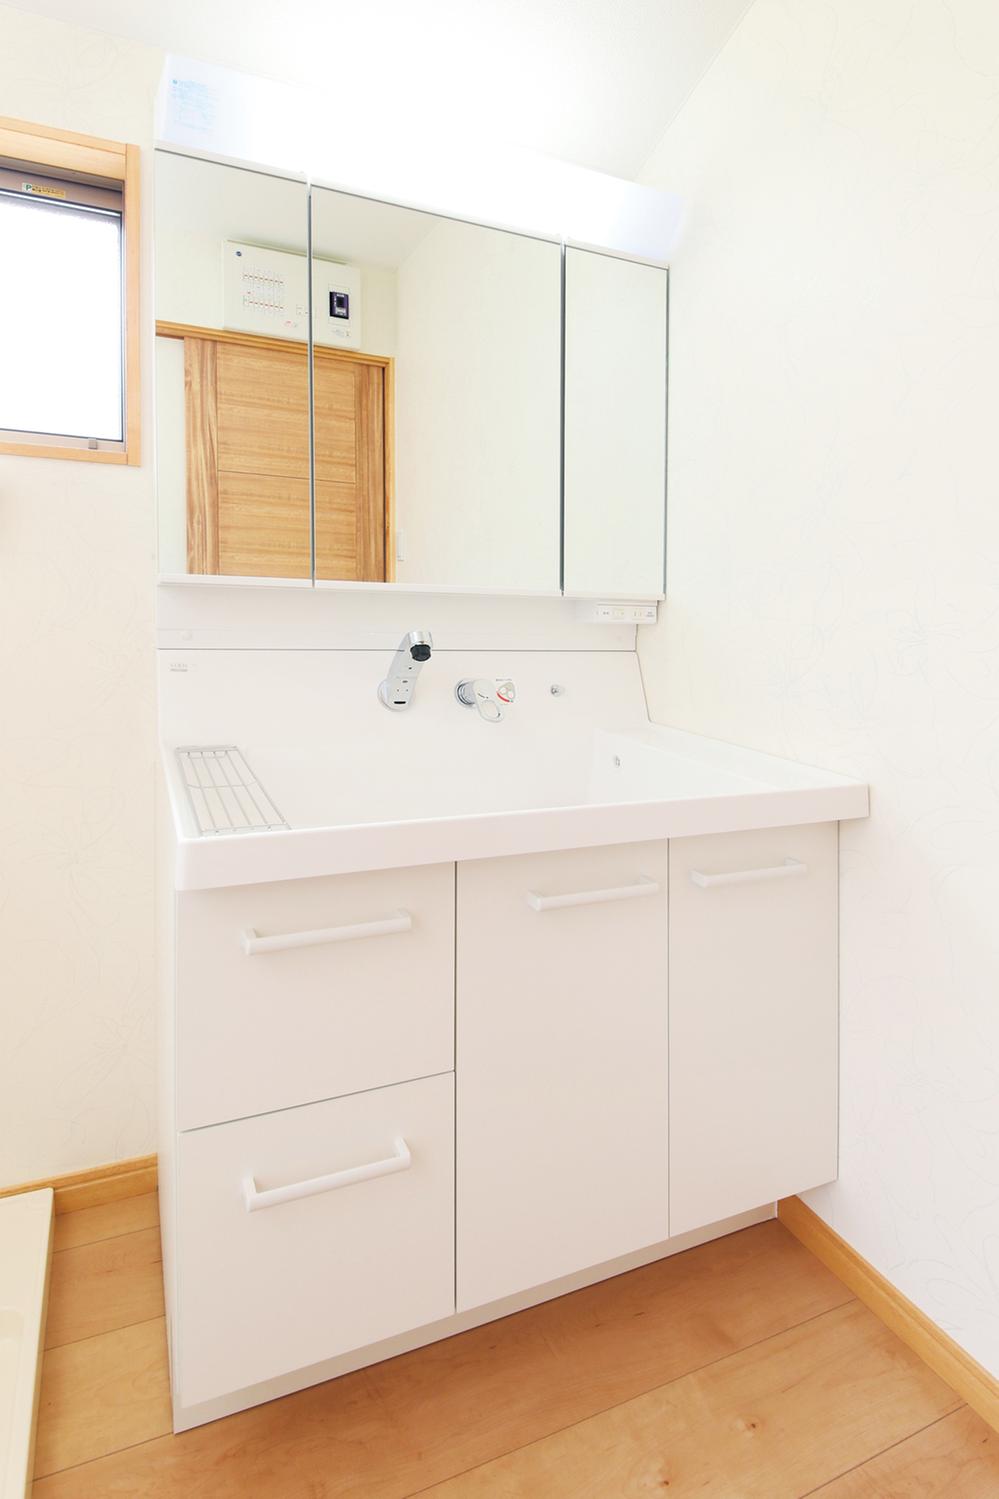 Building plan example (introspection photo). The vanity You are standard equipped with a three-sided mirror. Function that wife is happy, such as clean and easy to labor without drainage outlet and natural energy-saving Eco-handle has been enhanced